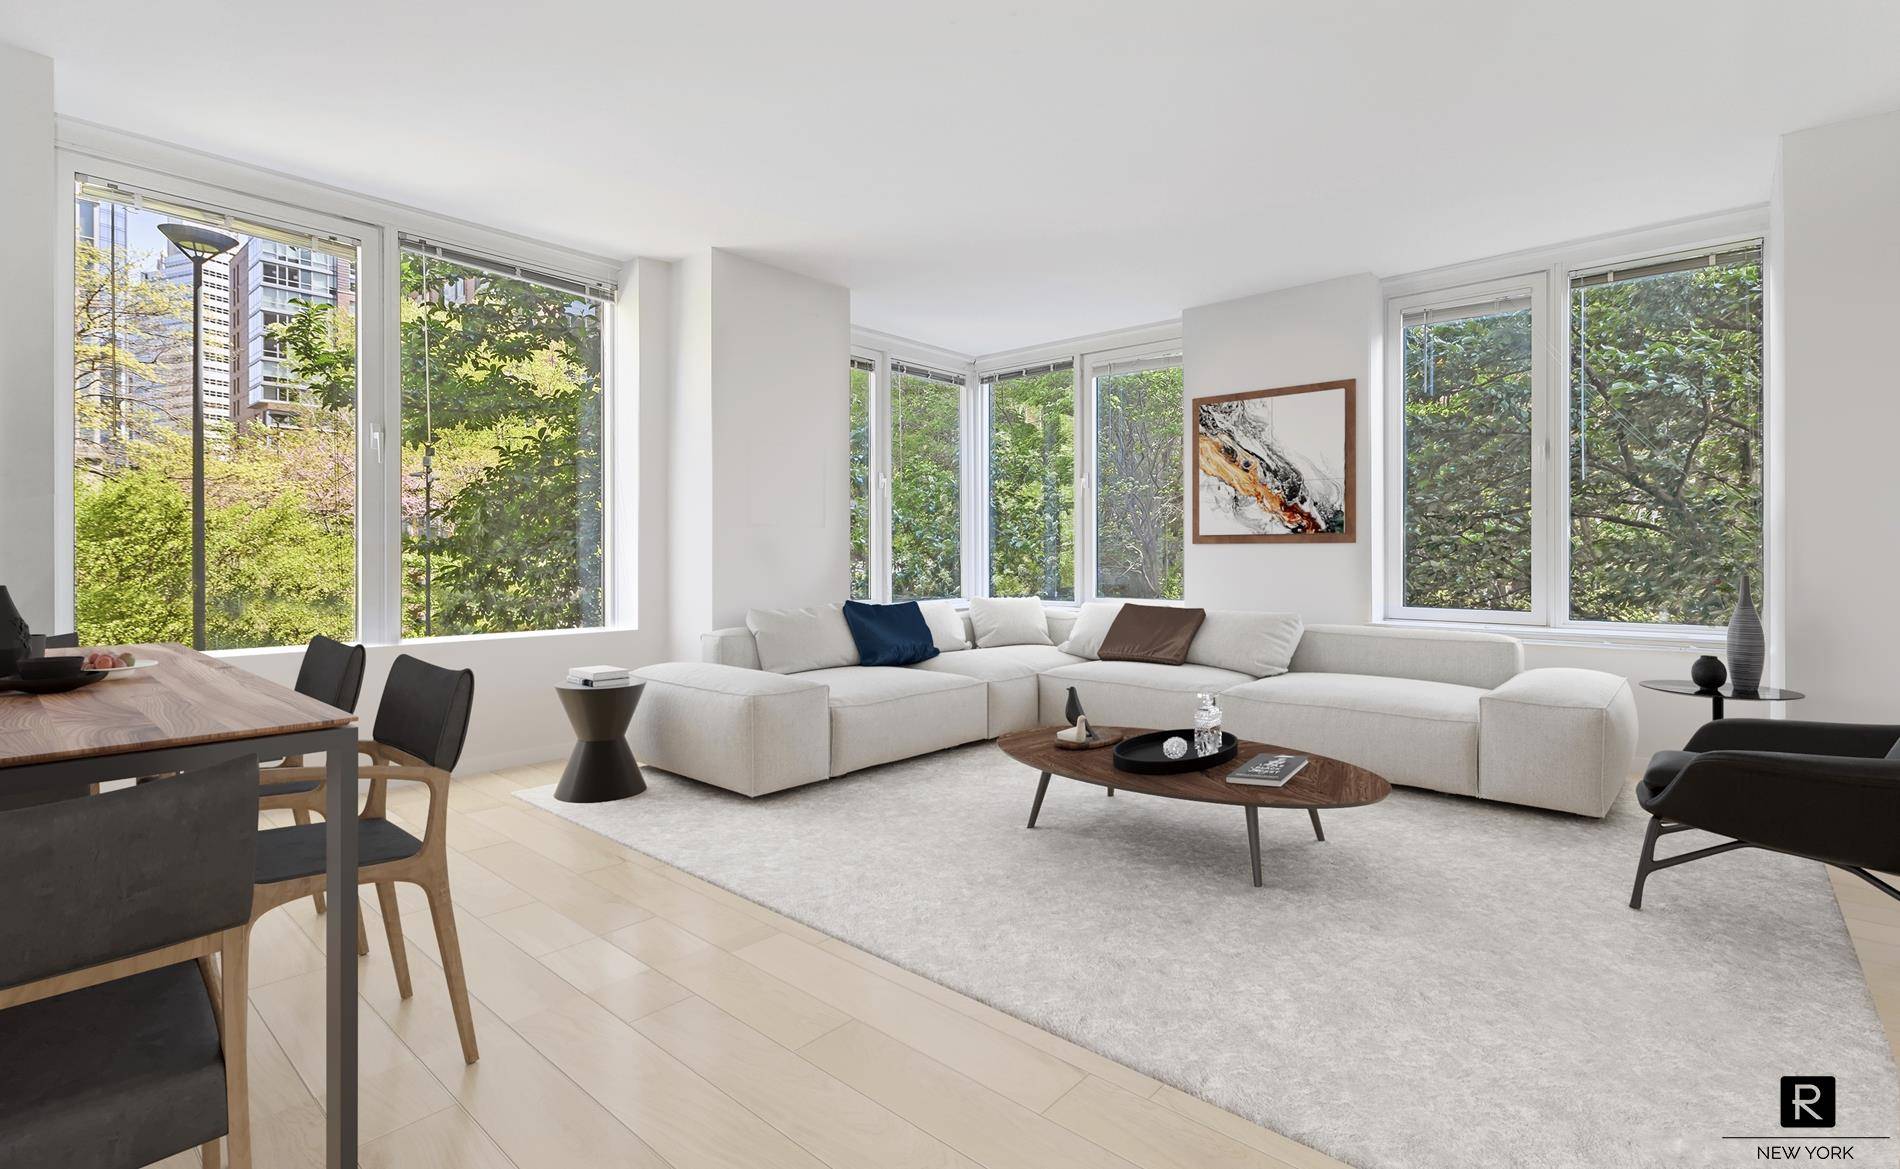 UNPARALLELED VALUE THIS HOME IS THE LEAST EXPENSIVE 3 BED 3 BATH IN ALL BATTERY PARK amp ; TRIBECA.